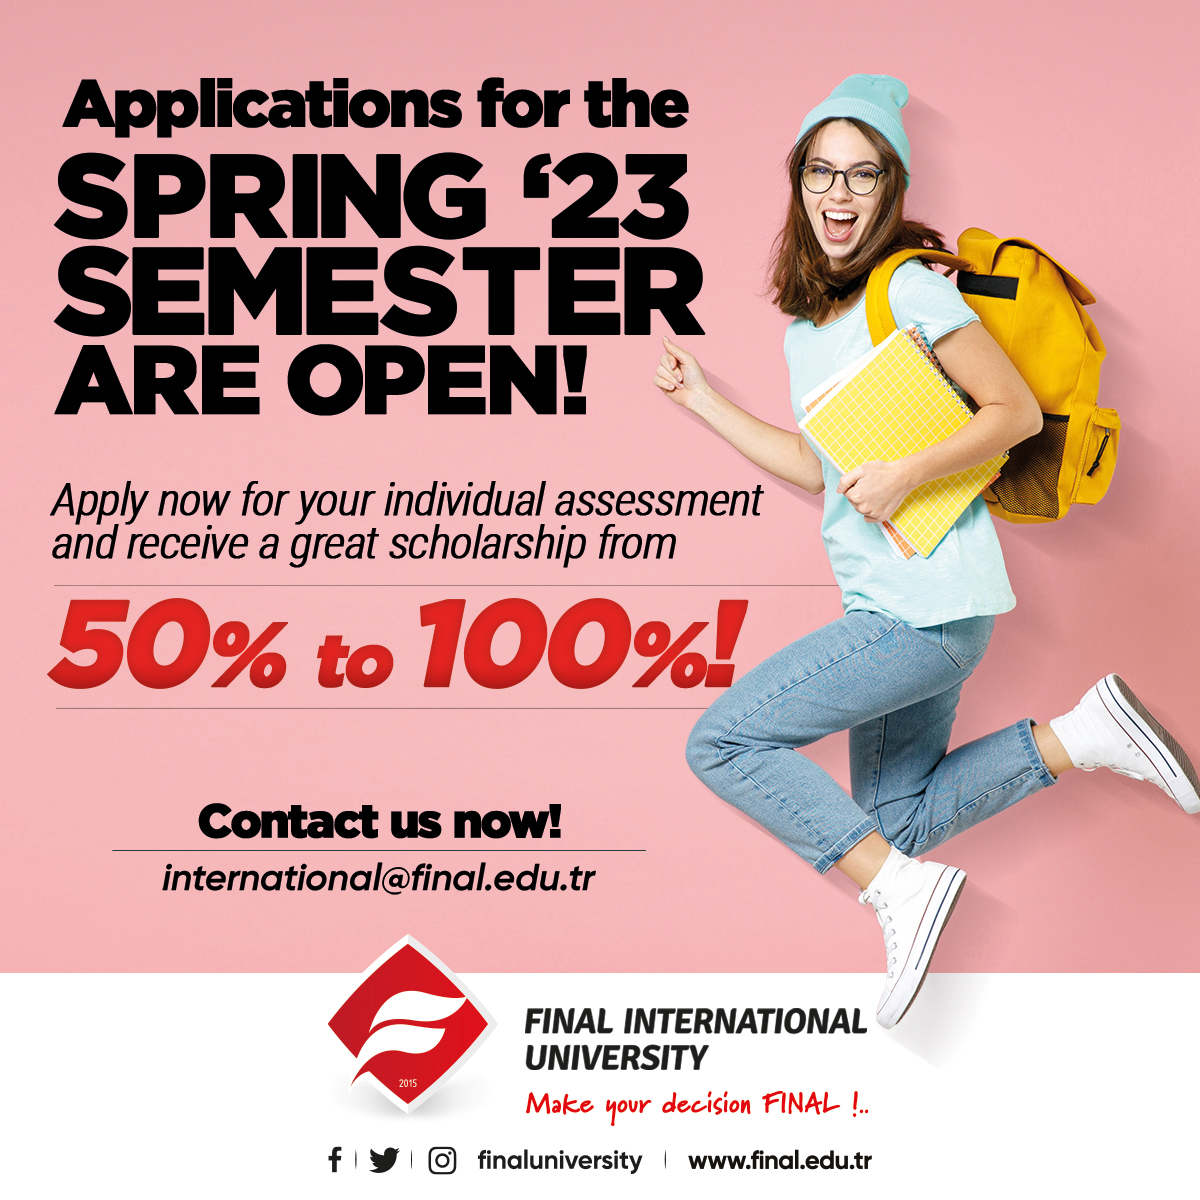 Final International University Applications for the Spring '23